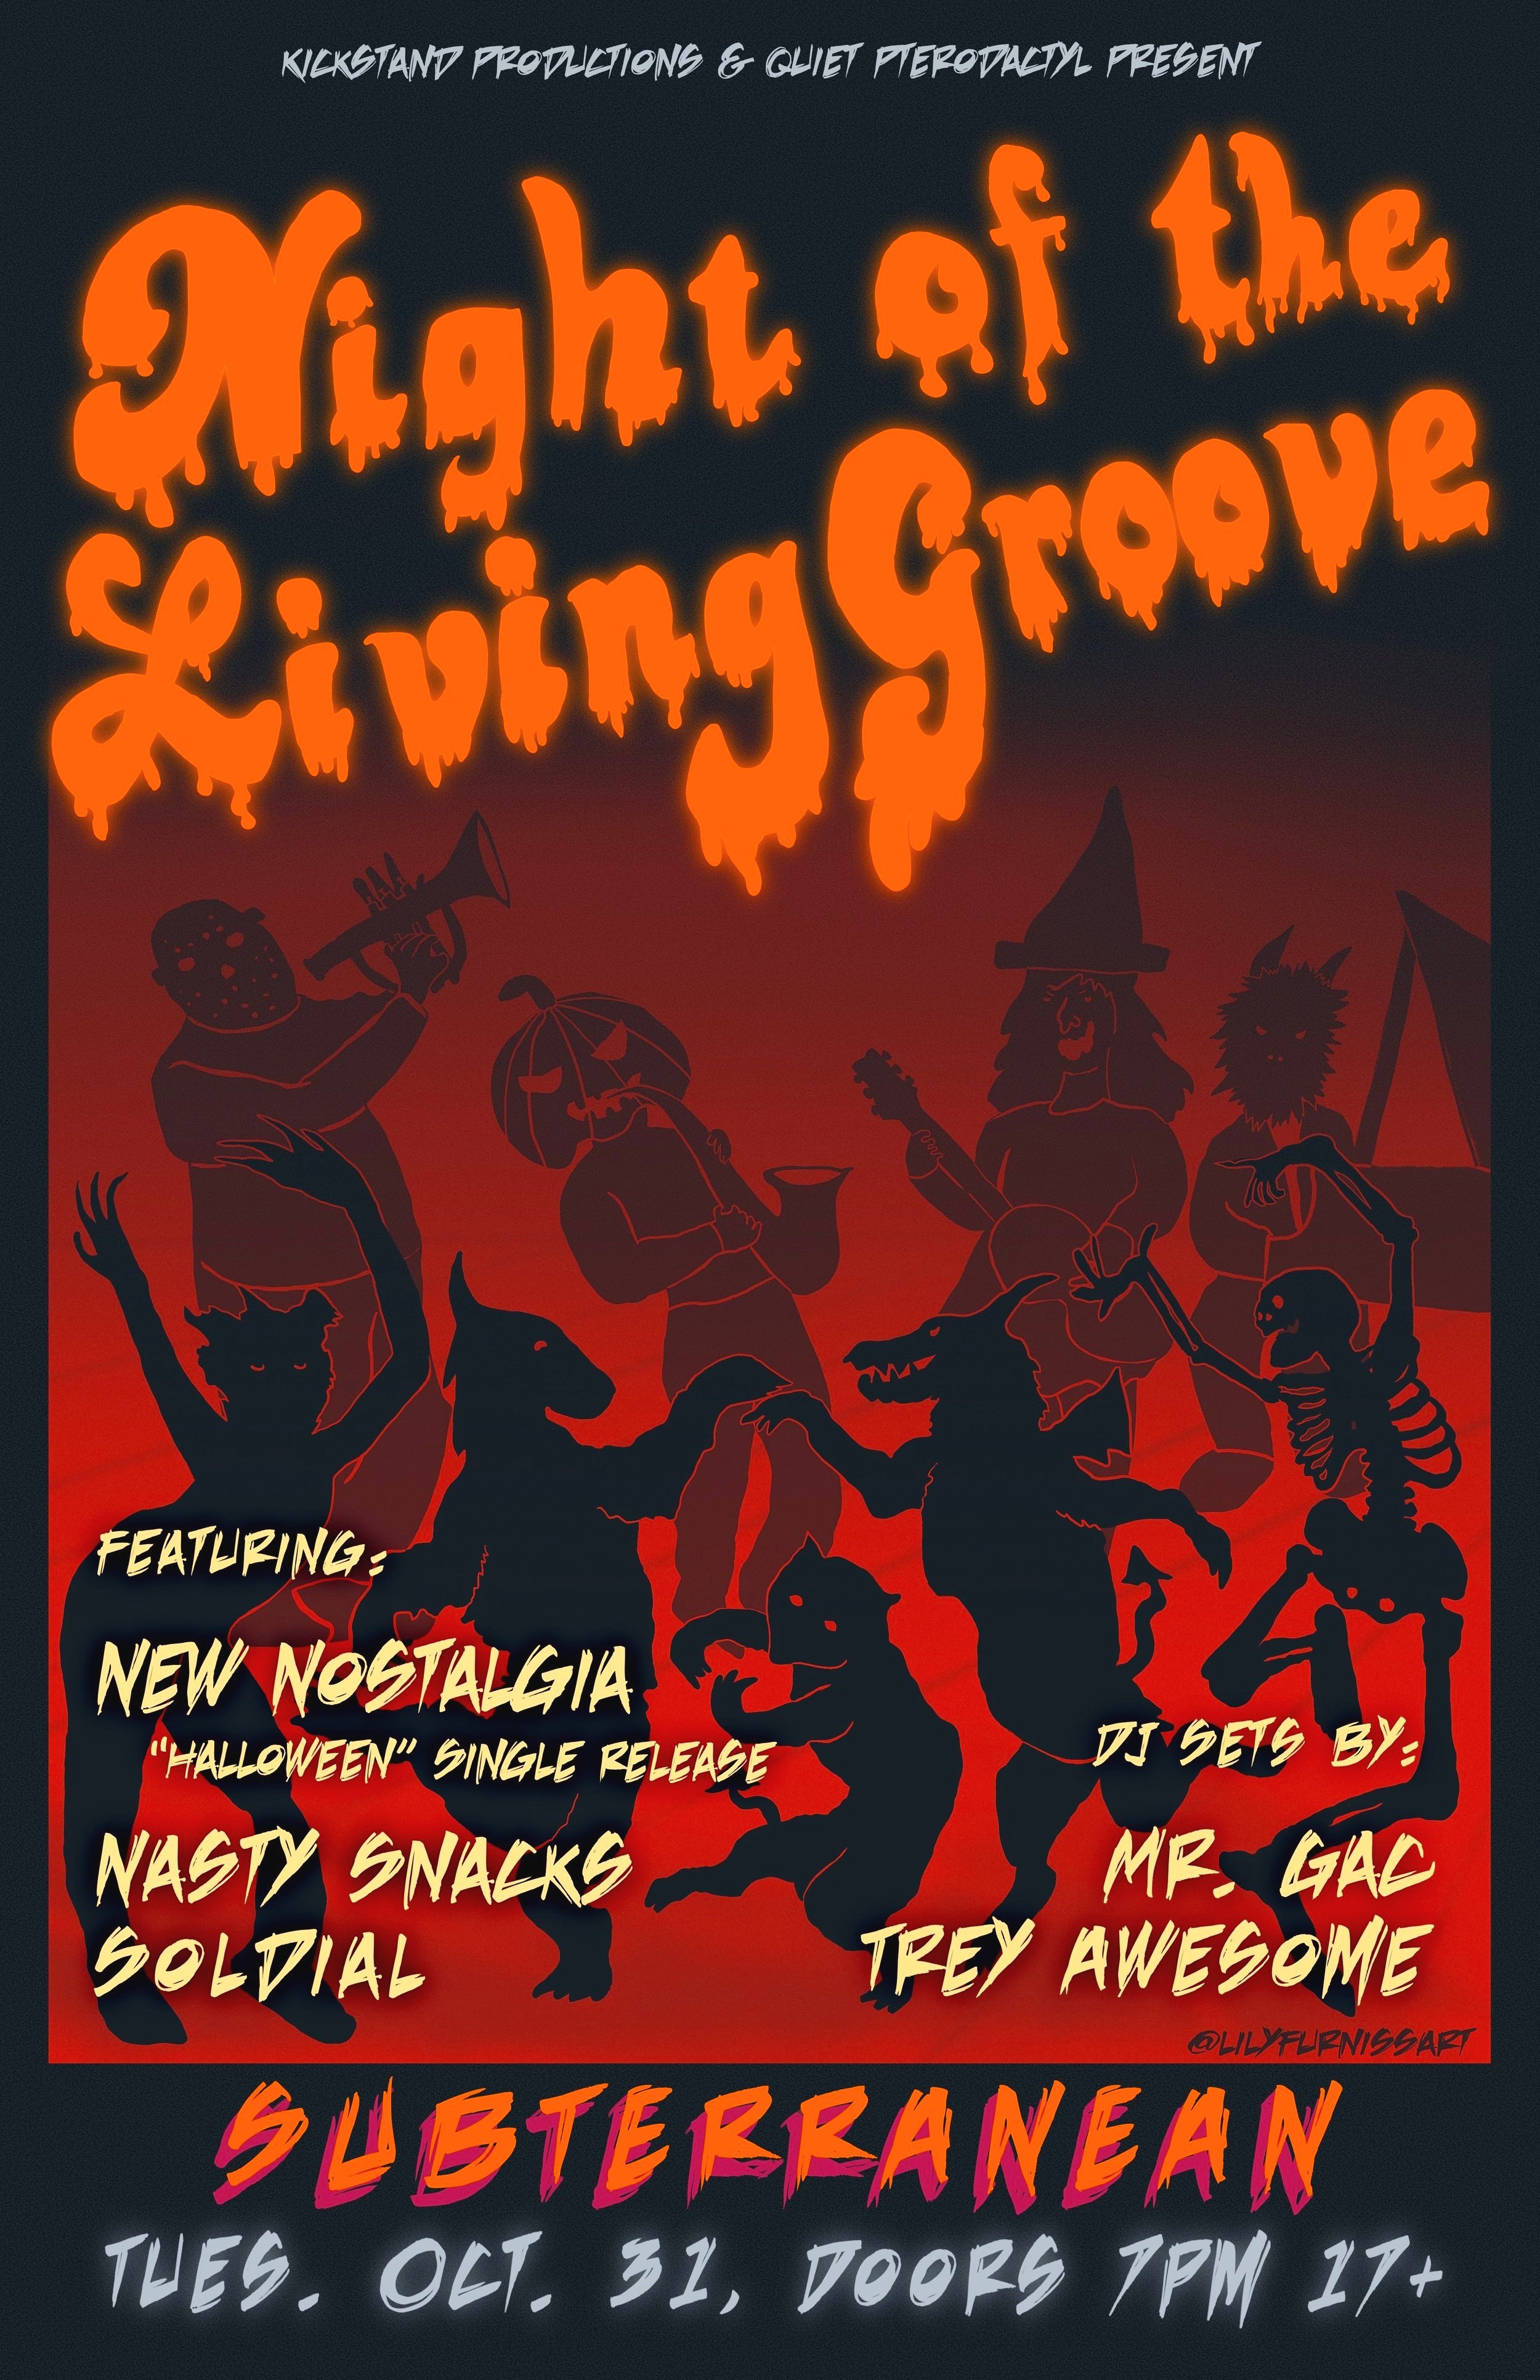 Night of The Living Groove. 